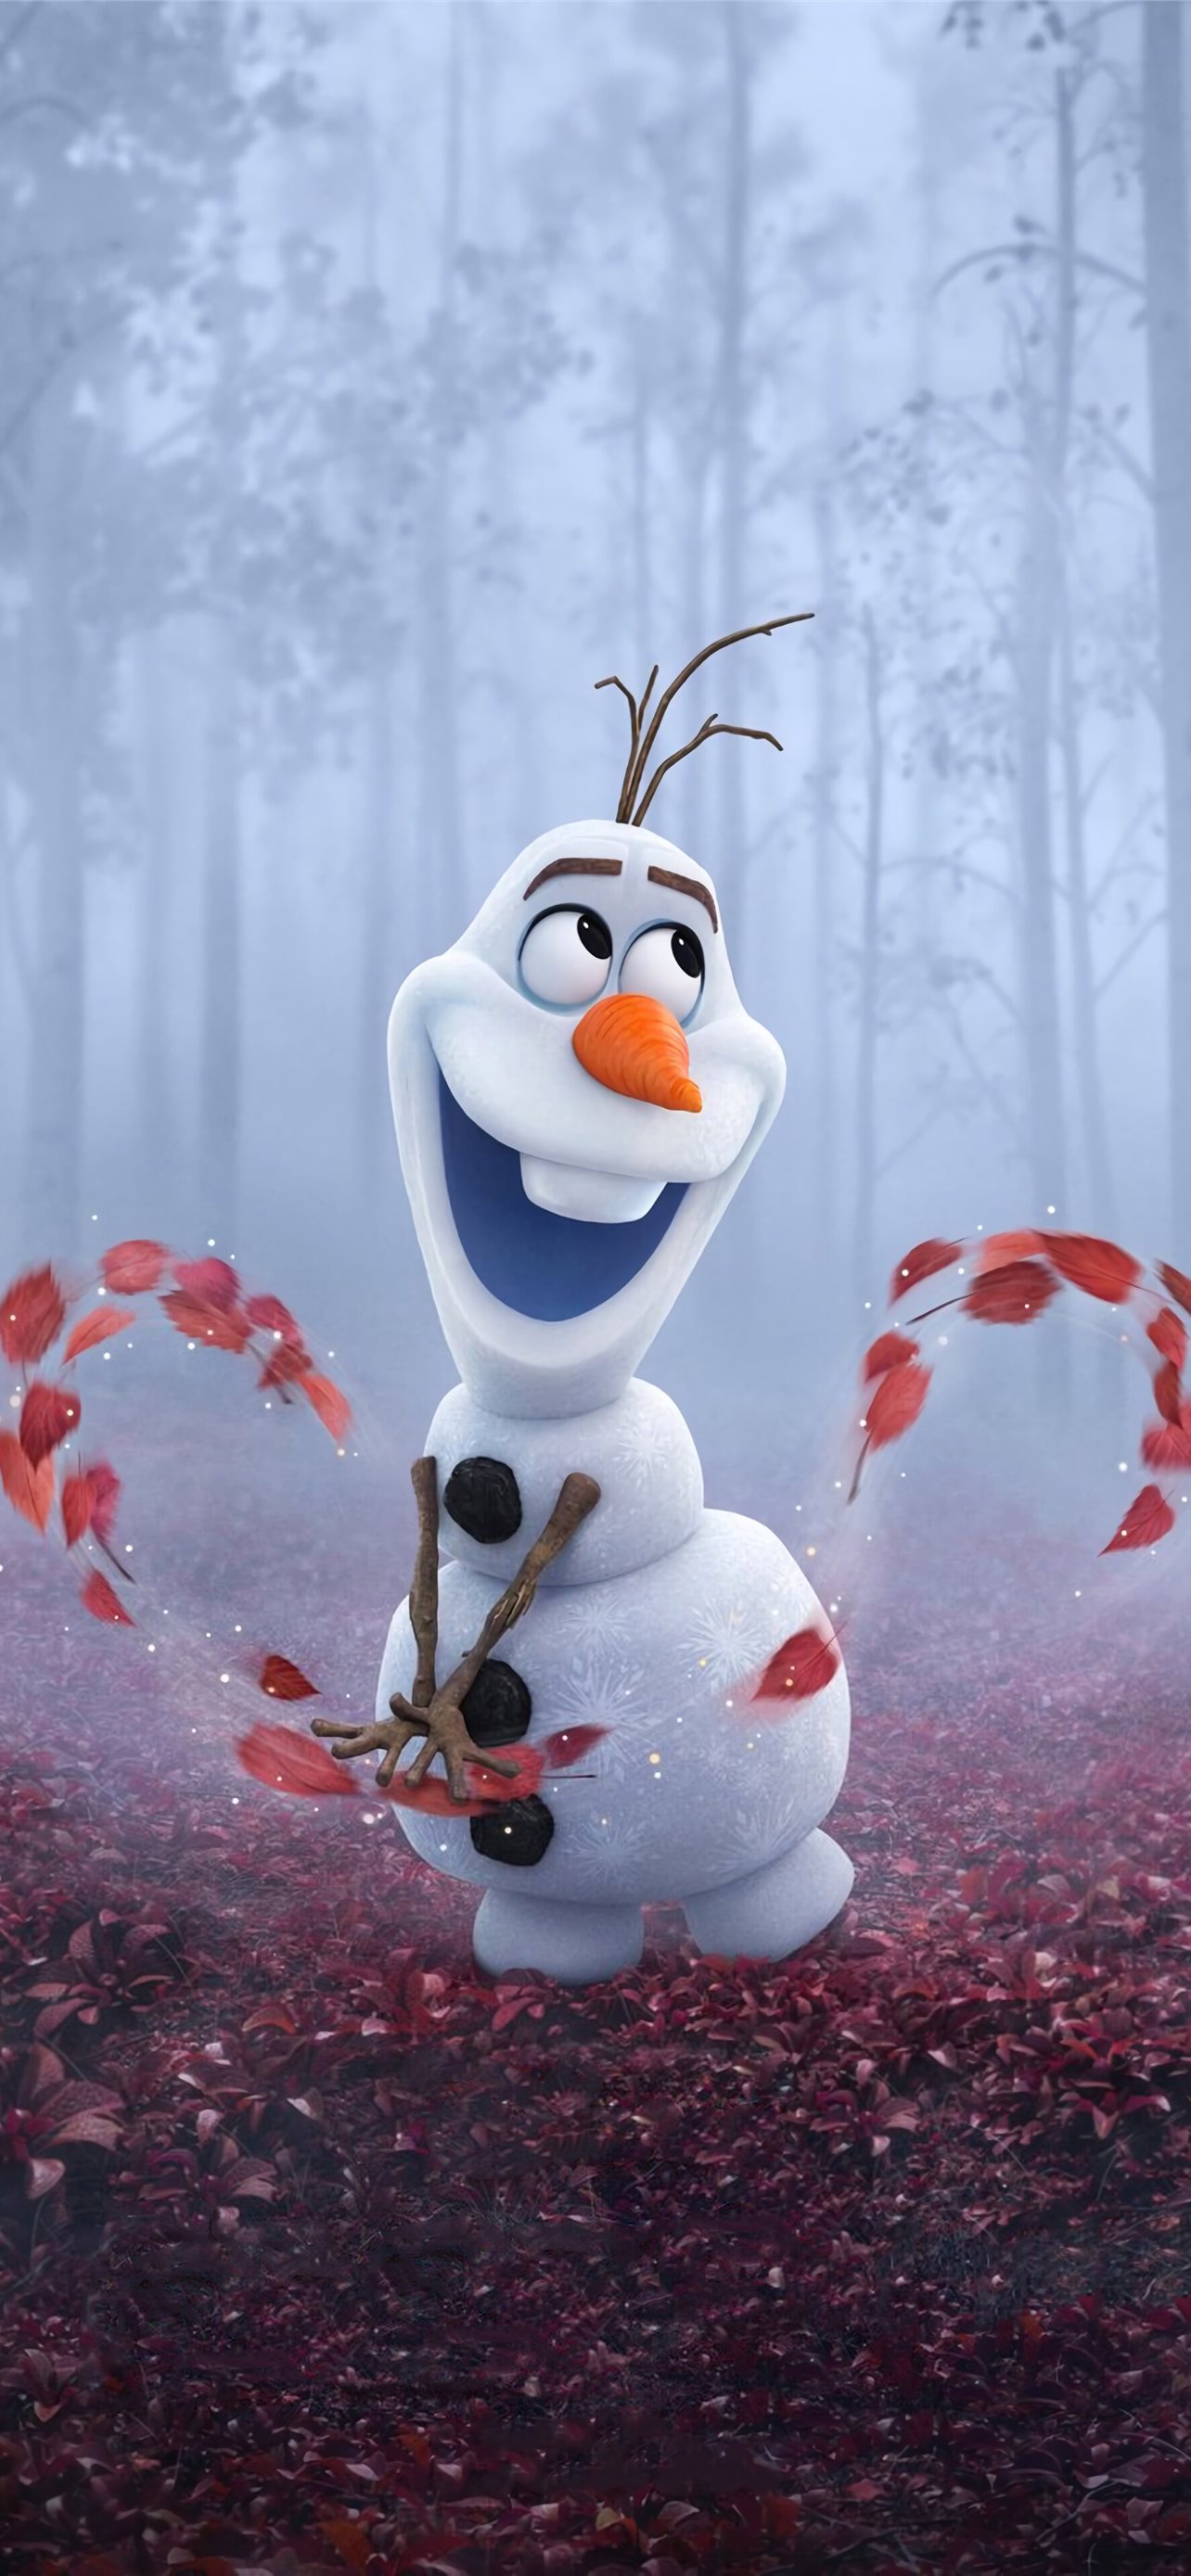 326237 Olaf Frozen 2 4K phone HD Images Background... iPhone Wallpapers  Free Download